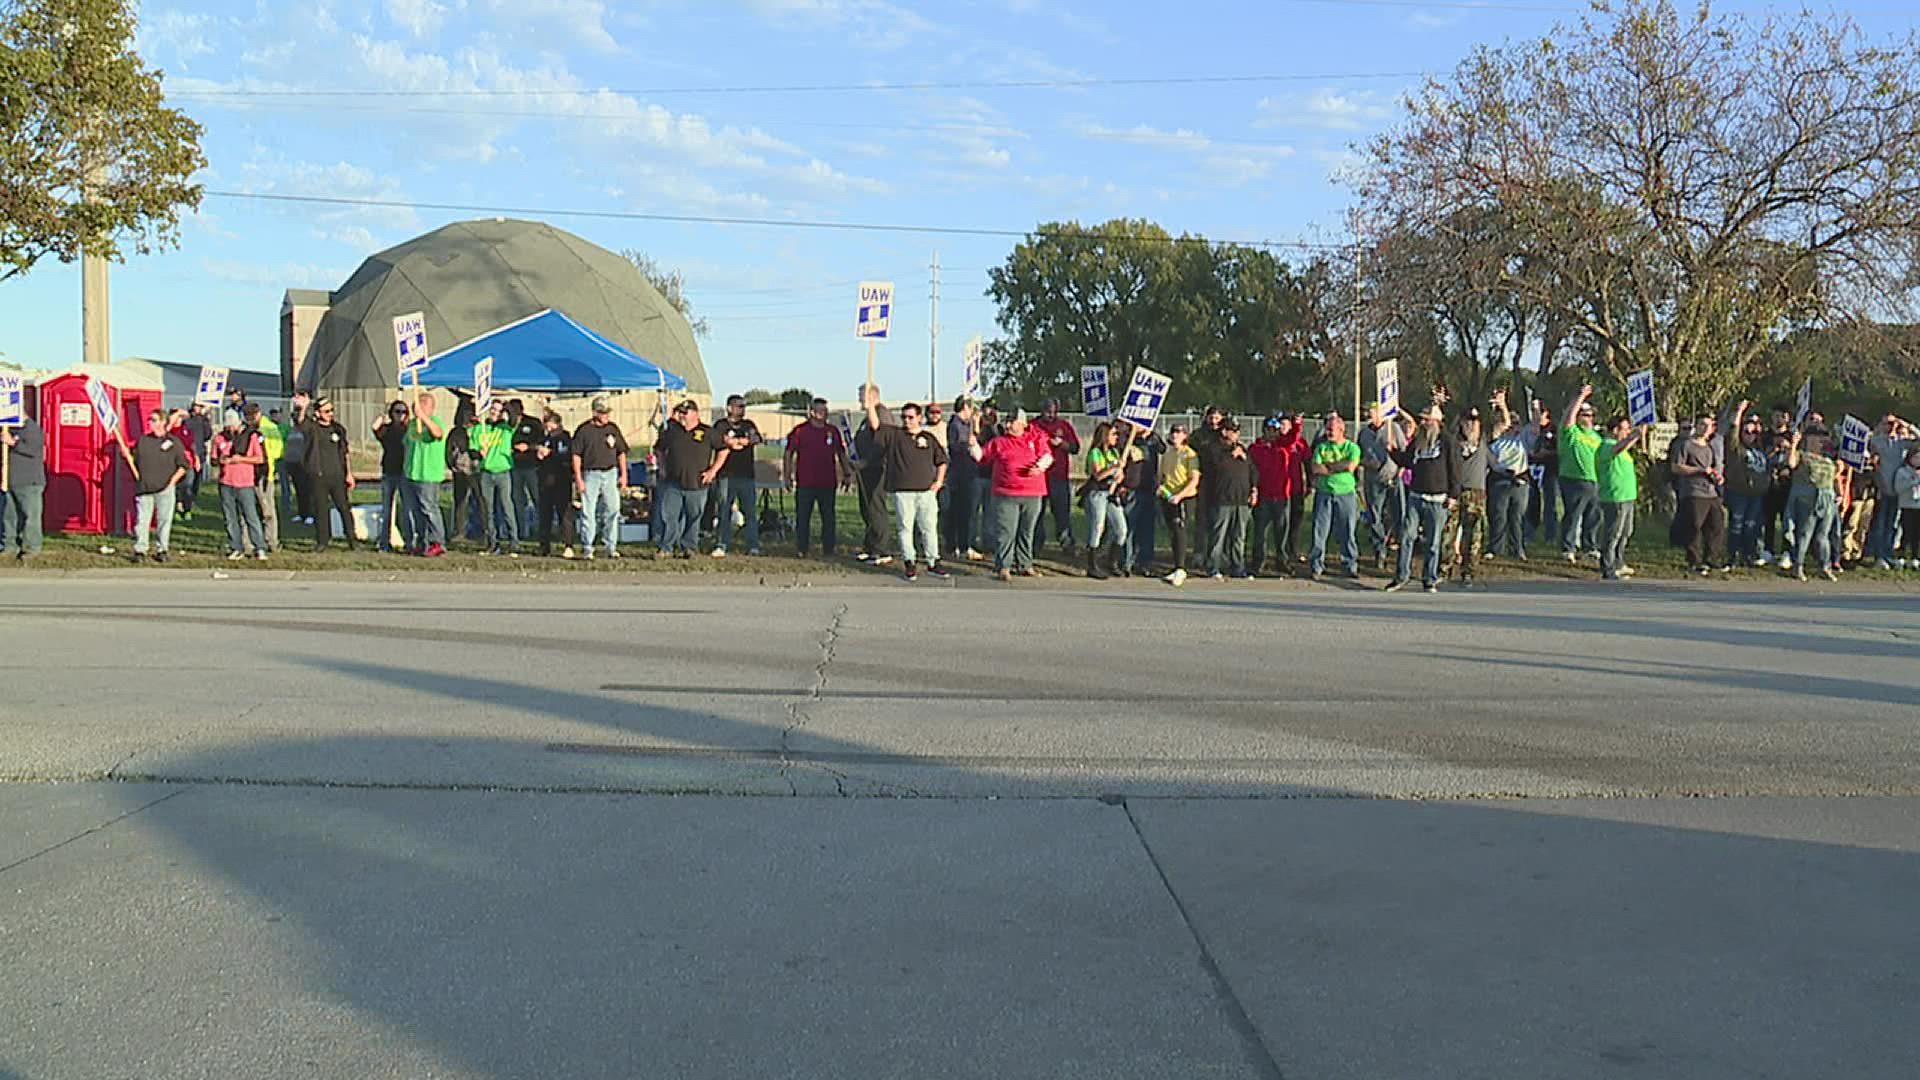 UAW workers from different states joined the picket liens in East Moline to support John Deere strikers.